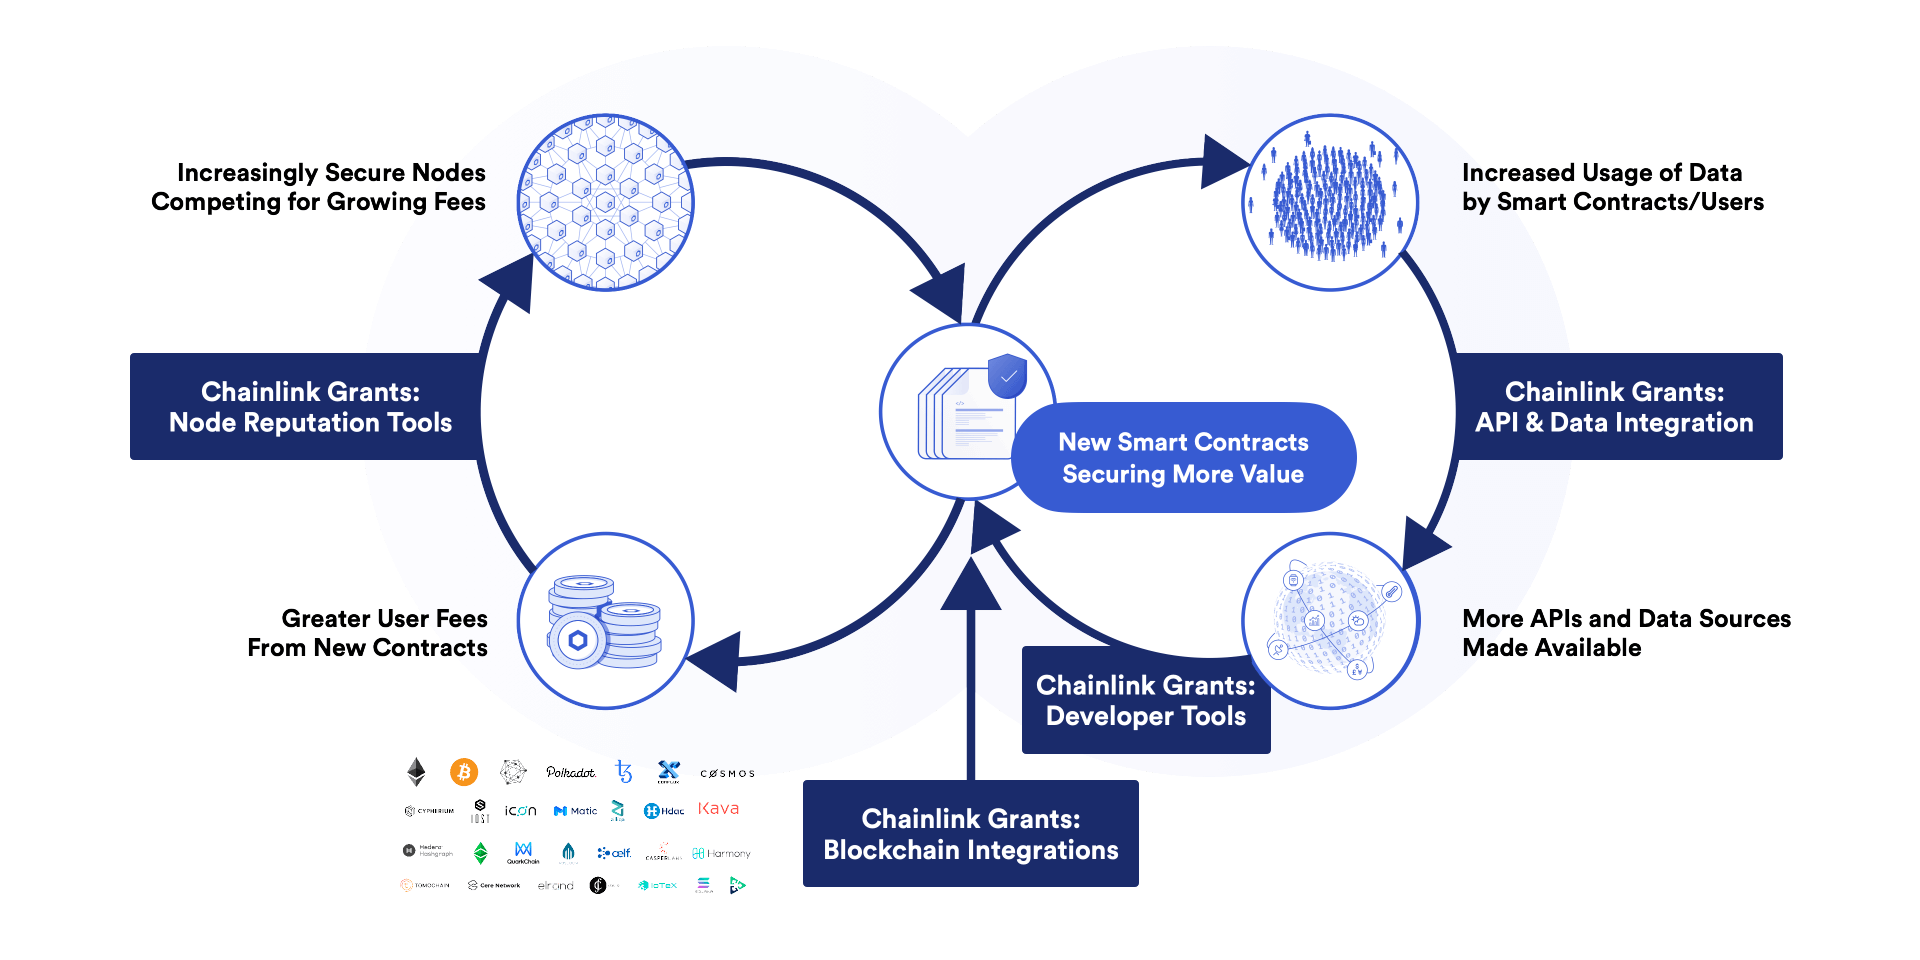 A diagram showing all of the previous positive feedback loops together to enable a highly secure and reliable ecosystem.